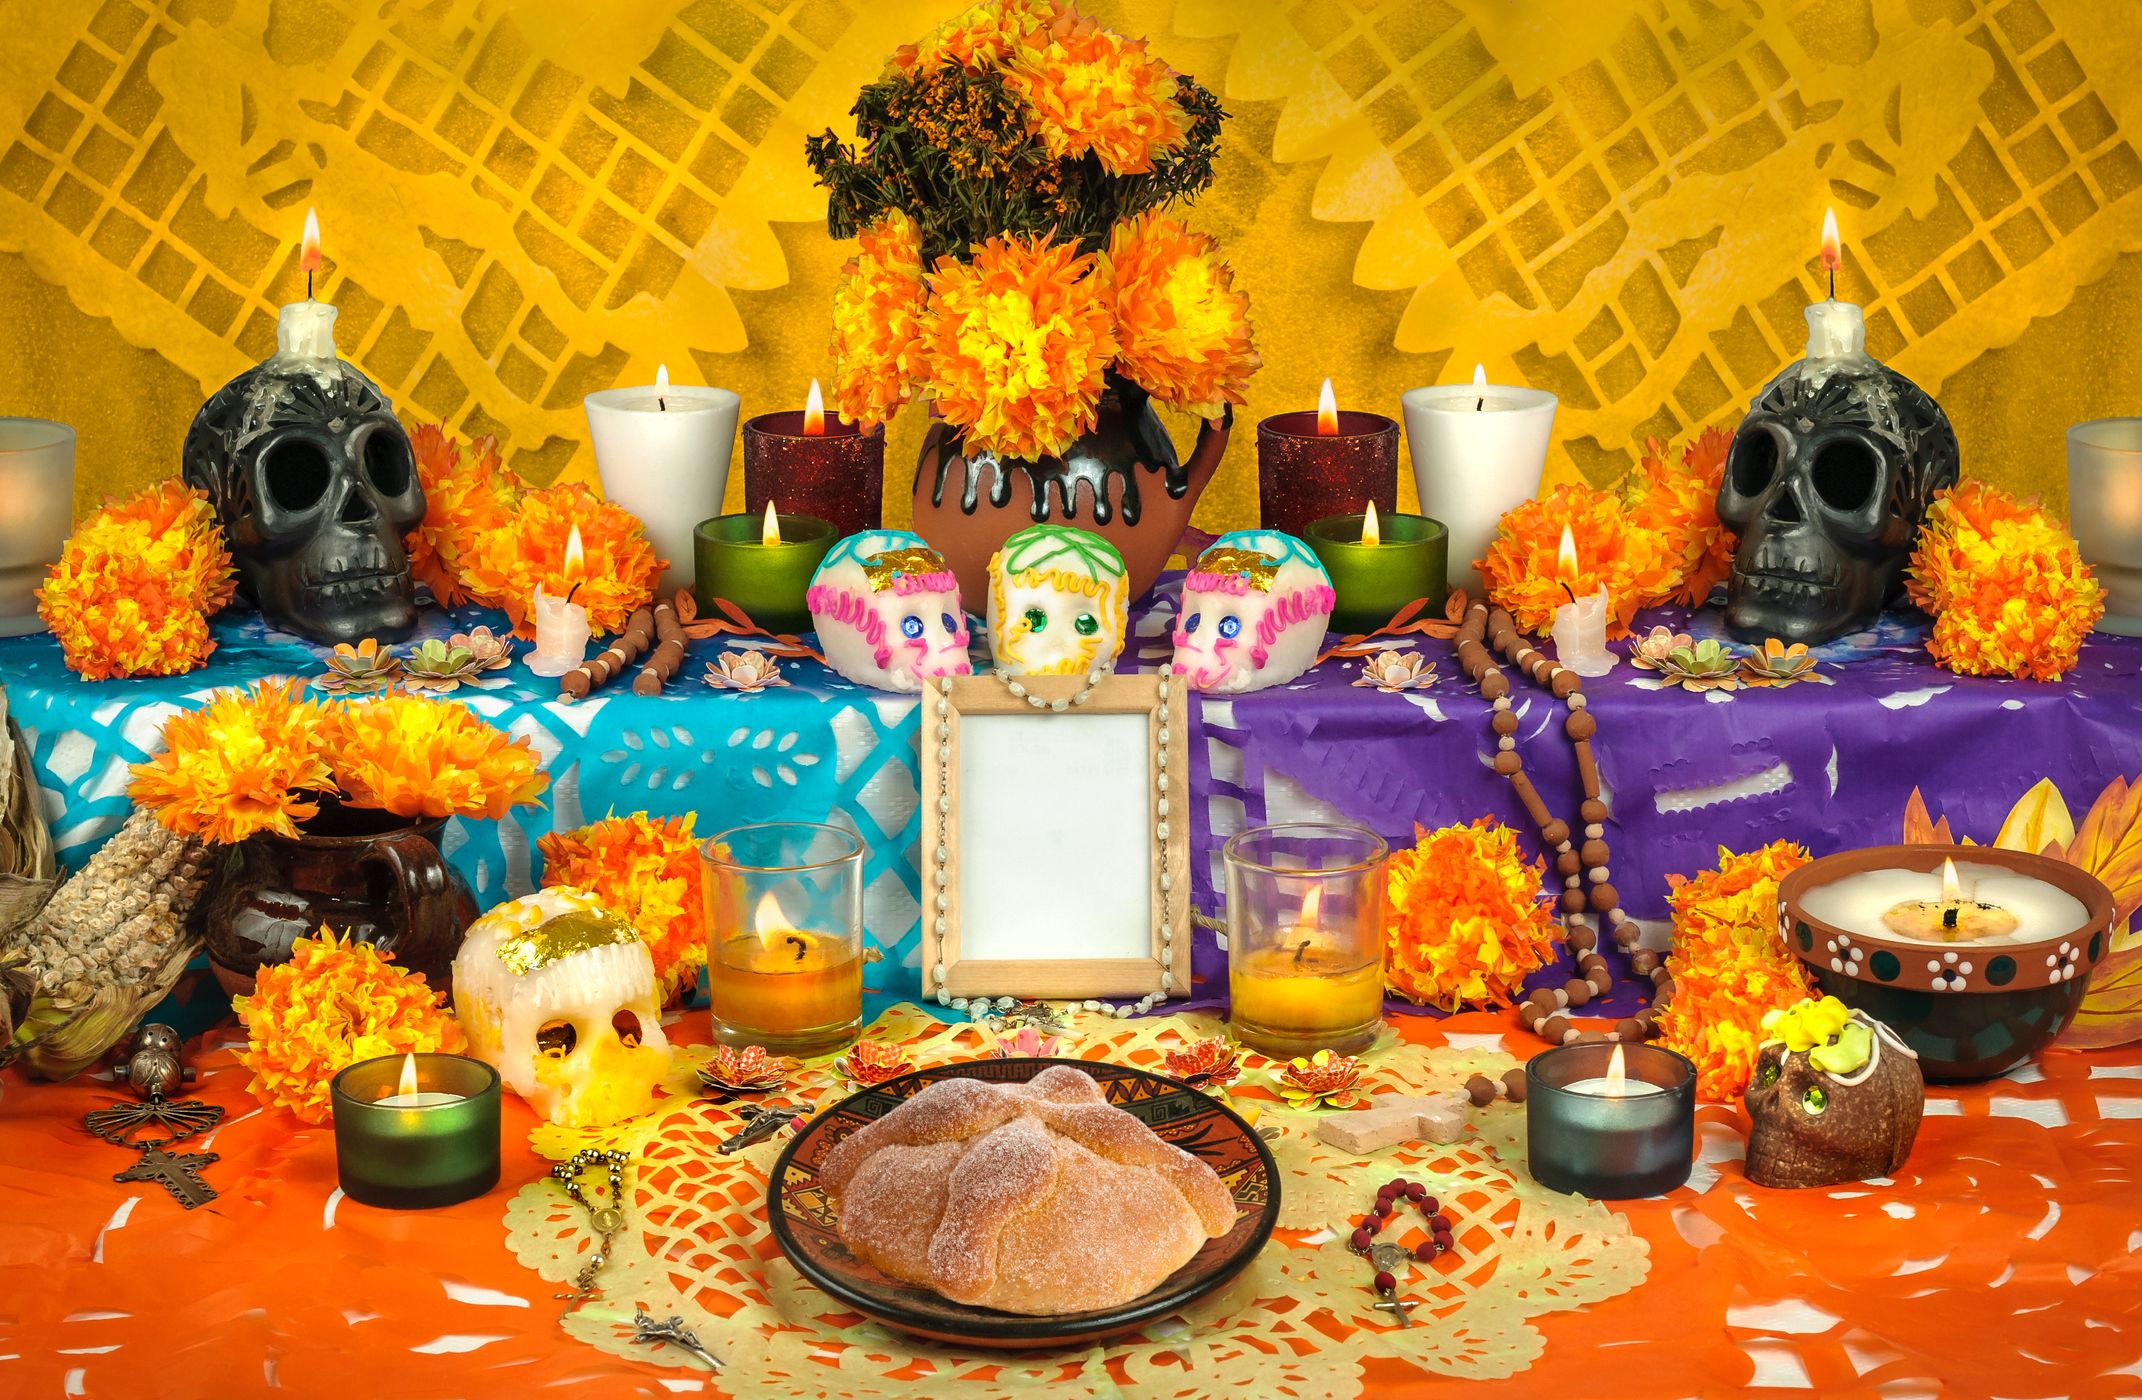 A Table With Food And Candles